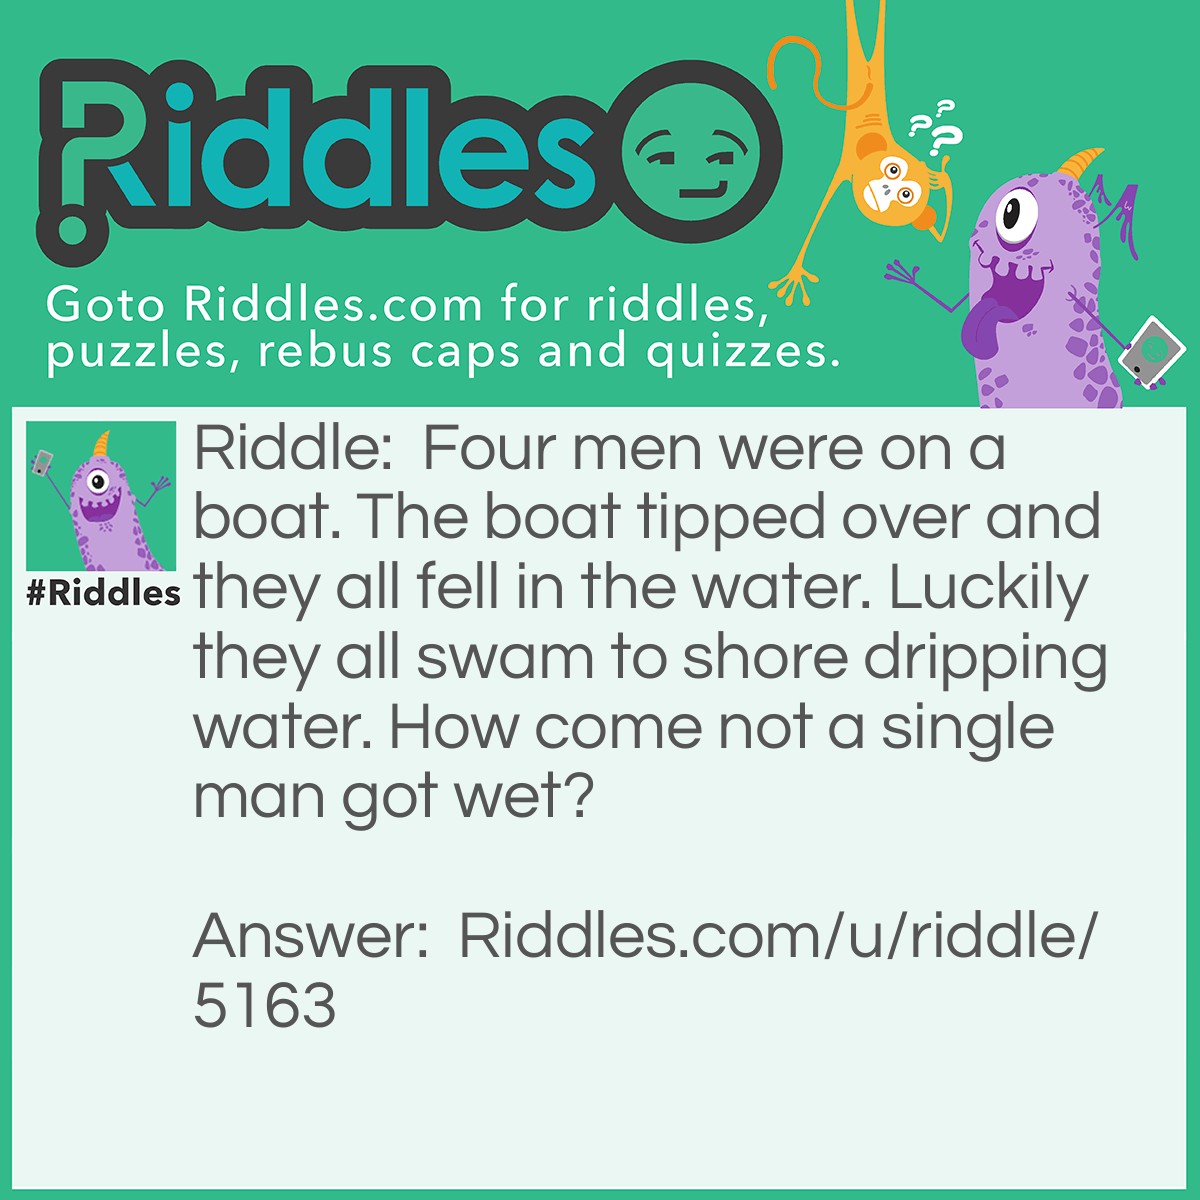 Riddle: Four men were on a boat. The boat tipped over and they all fell in the water. Luckily they all swam to shore dripping water. How come not a single man got wet? Answer: They all were married.